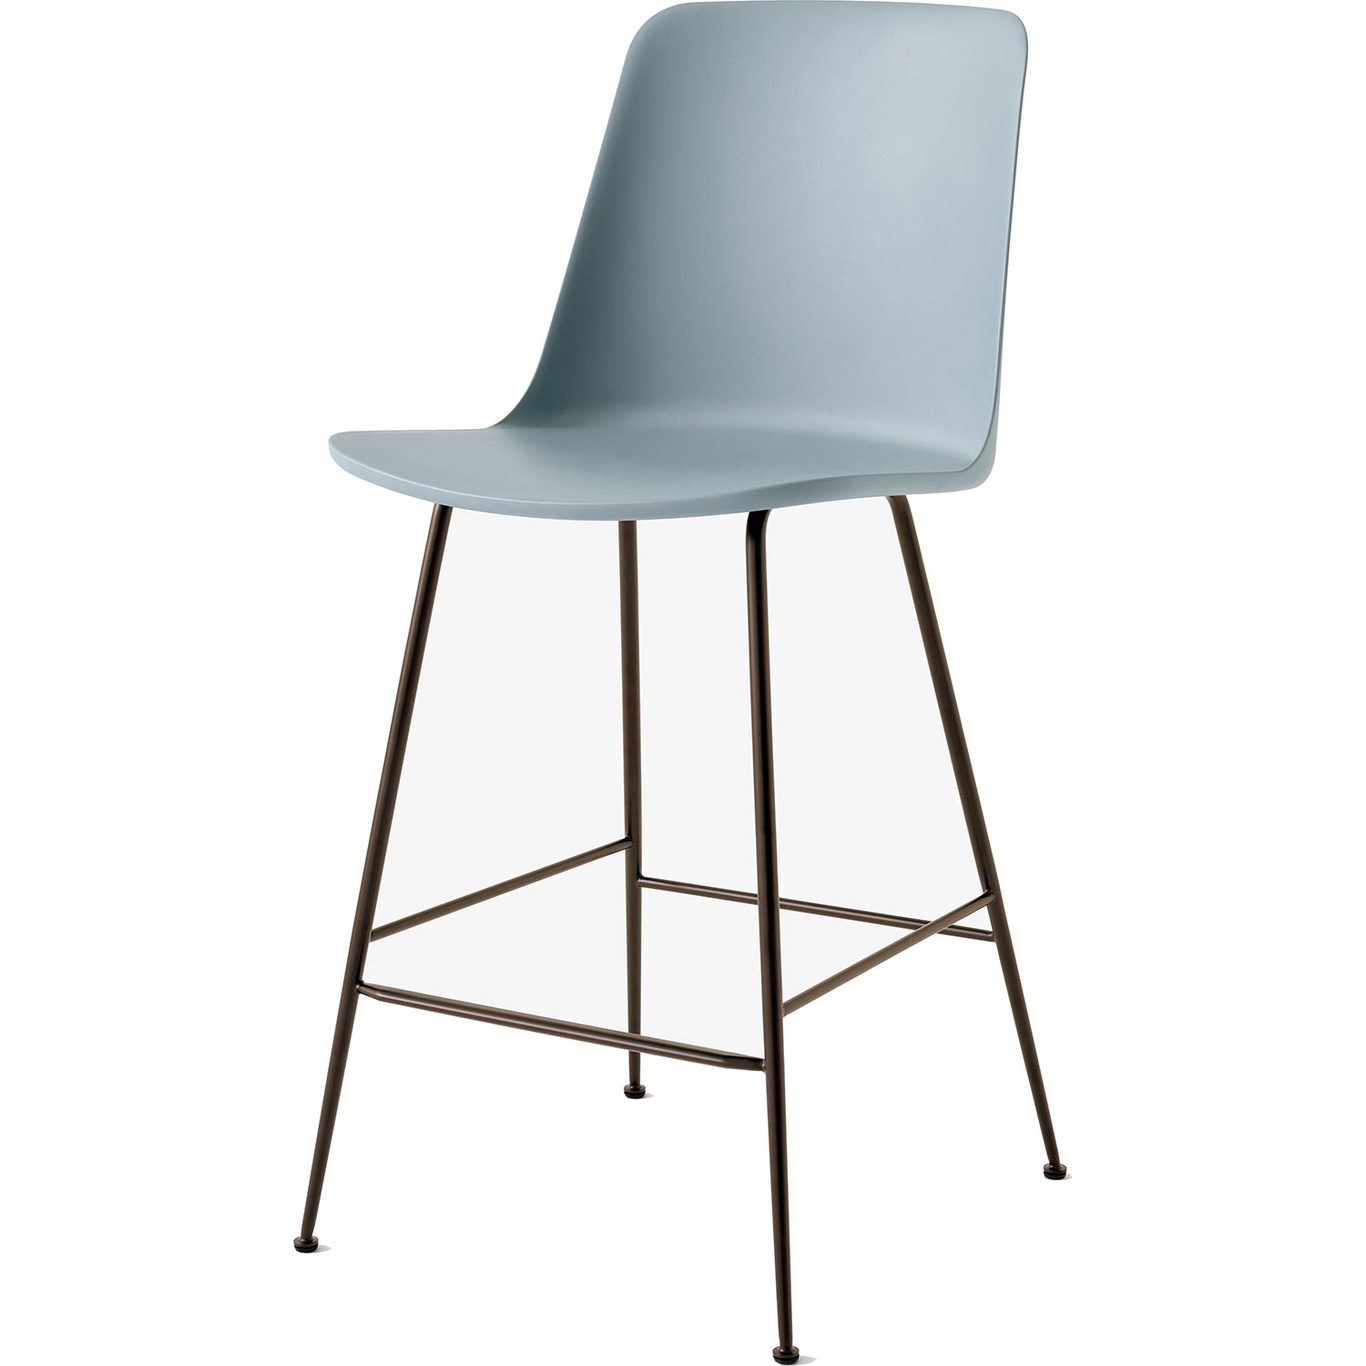 Rely HW91 Counter Chair, Black/Light Blue